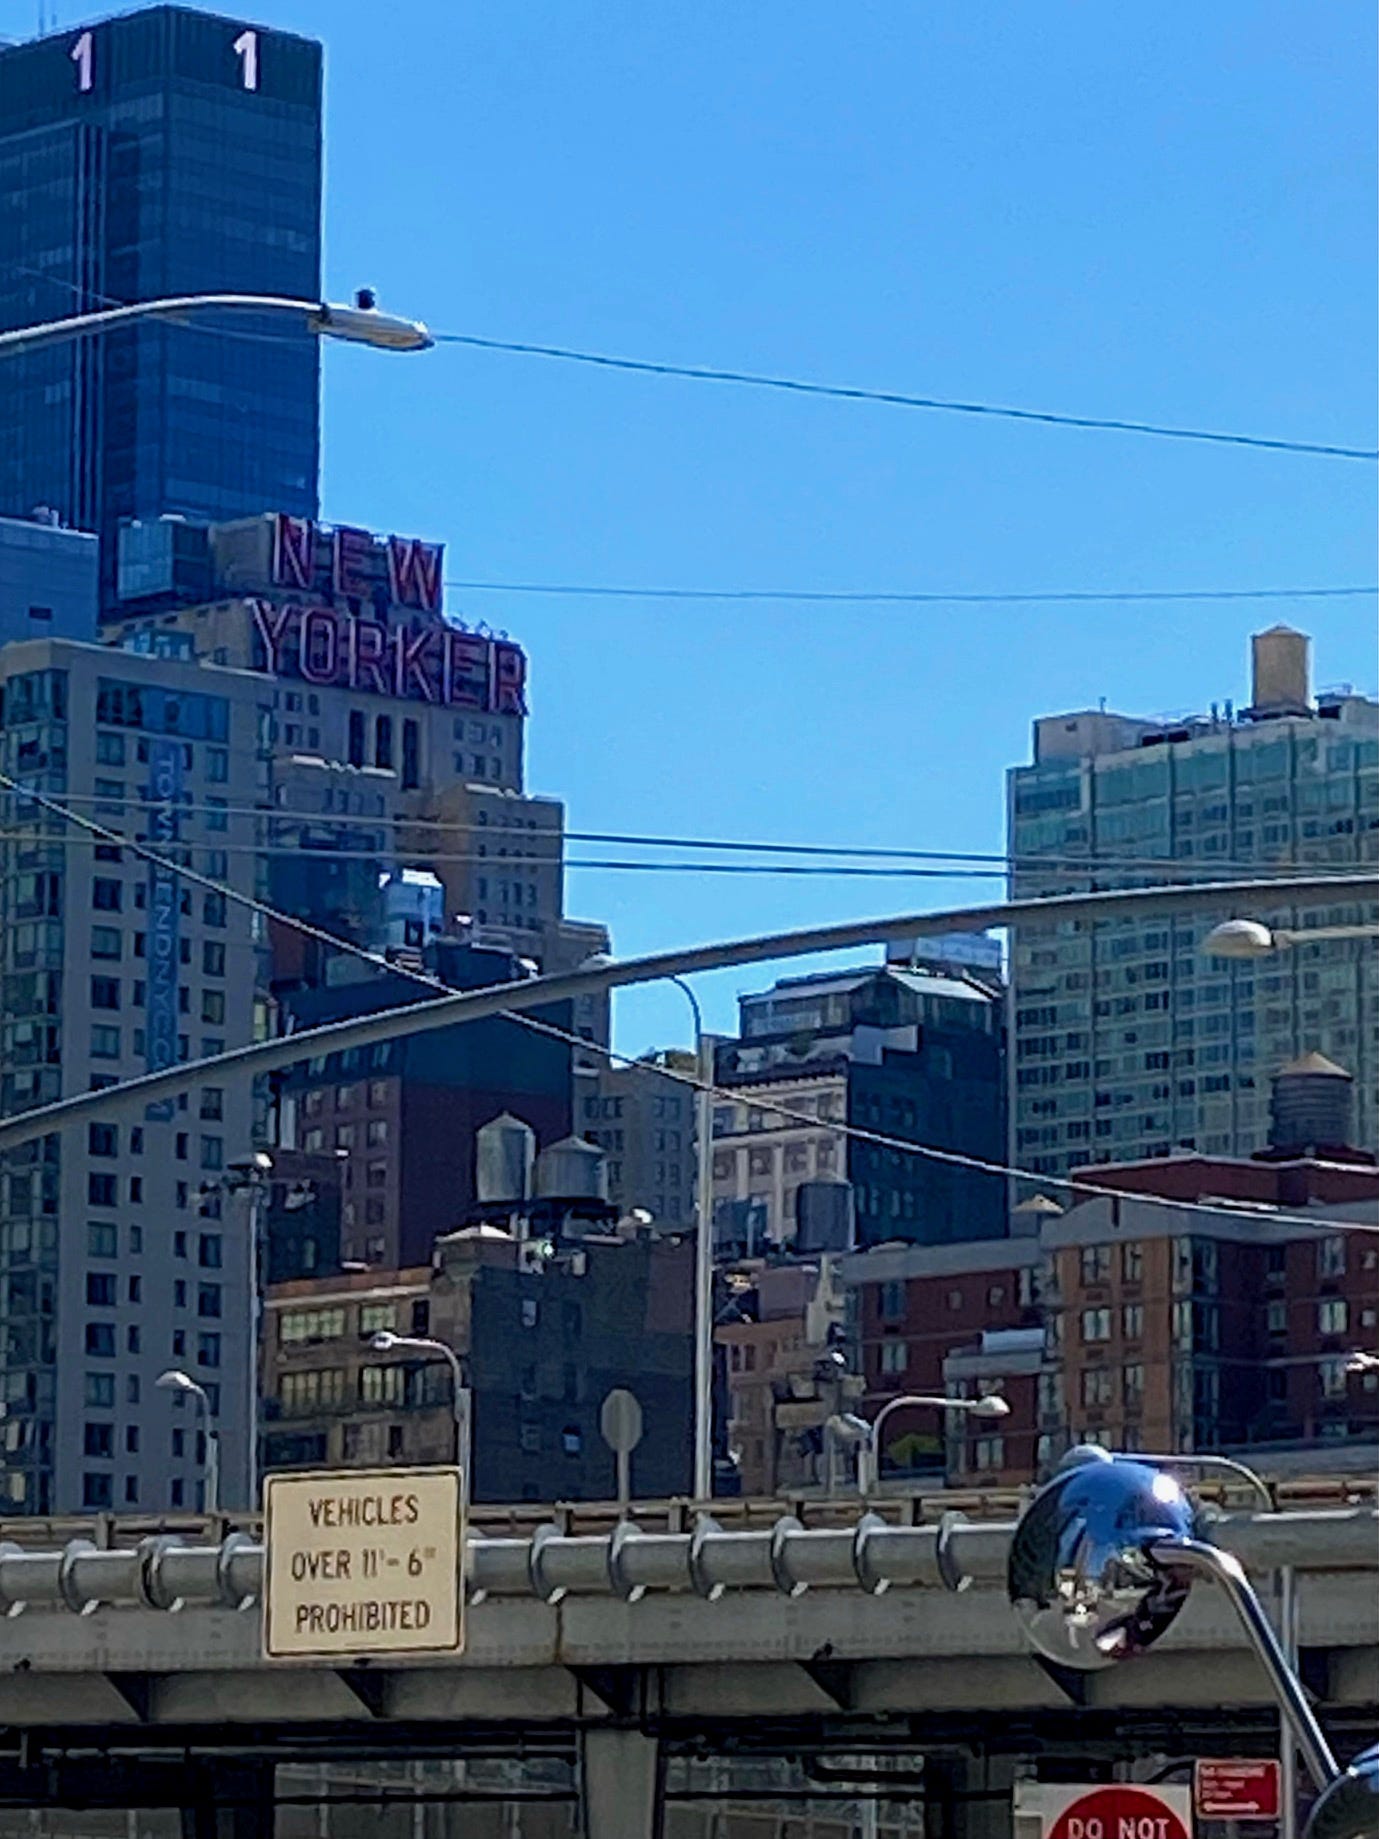 Six water towers are scattered across the roofs of varying heights in front of the New Yorker hotel. 1 Penn Plaza is visible behind it.